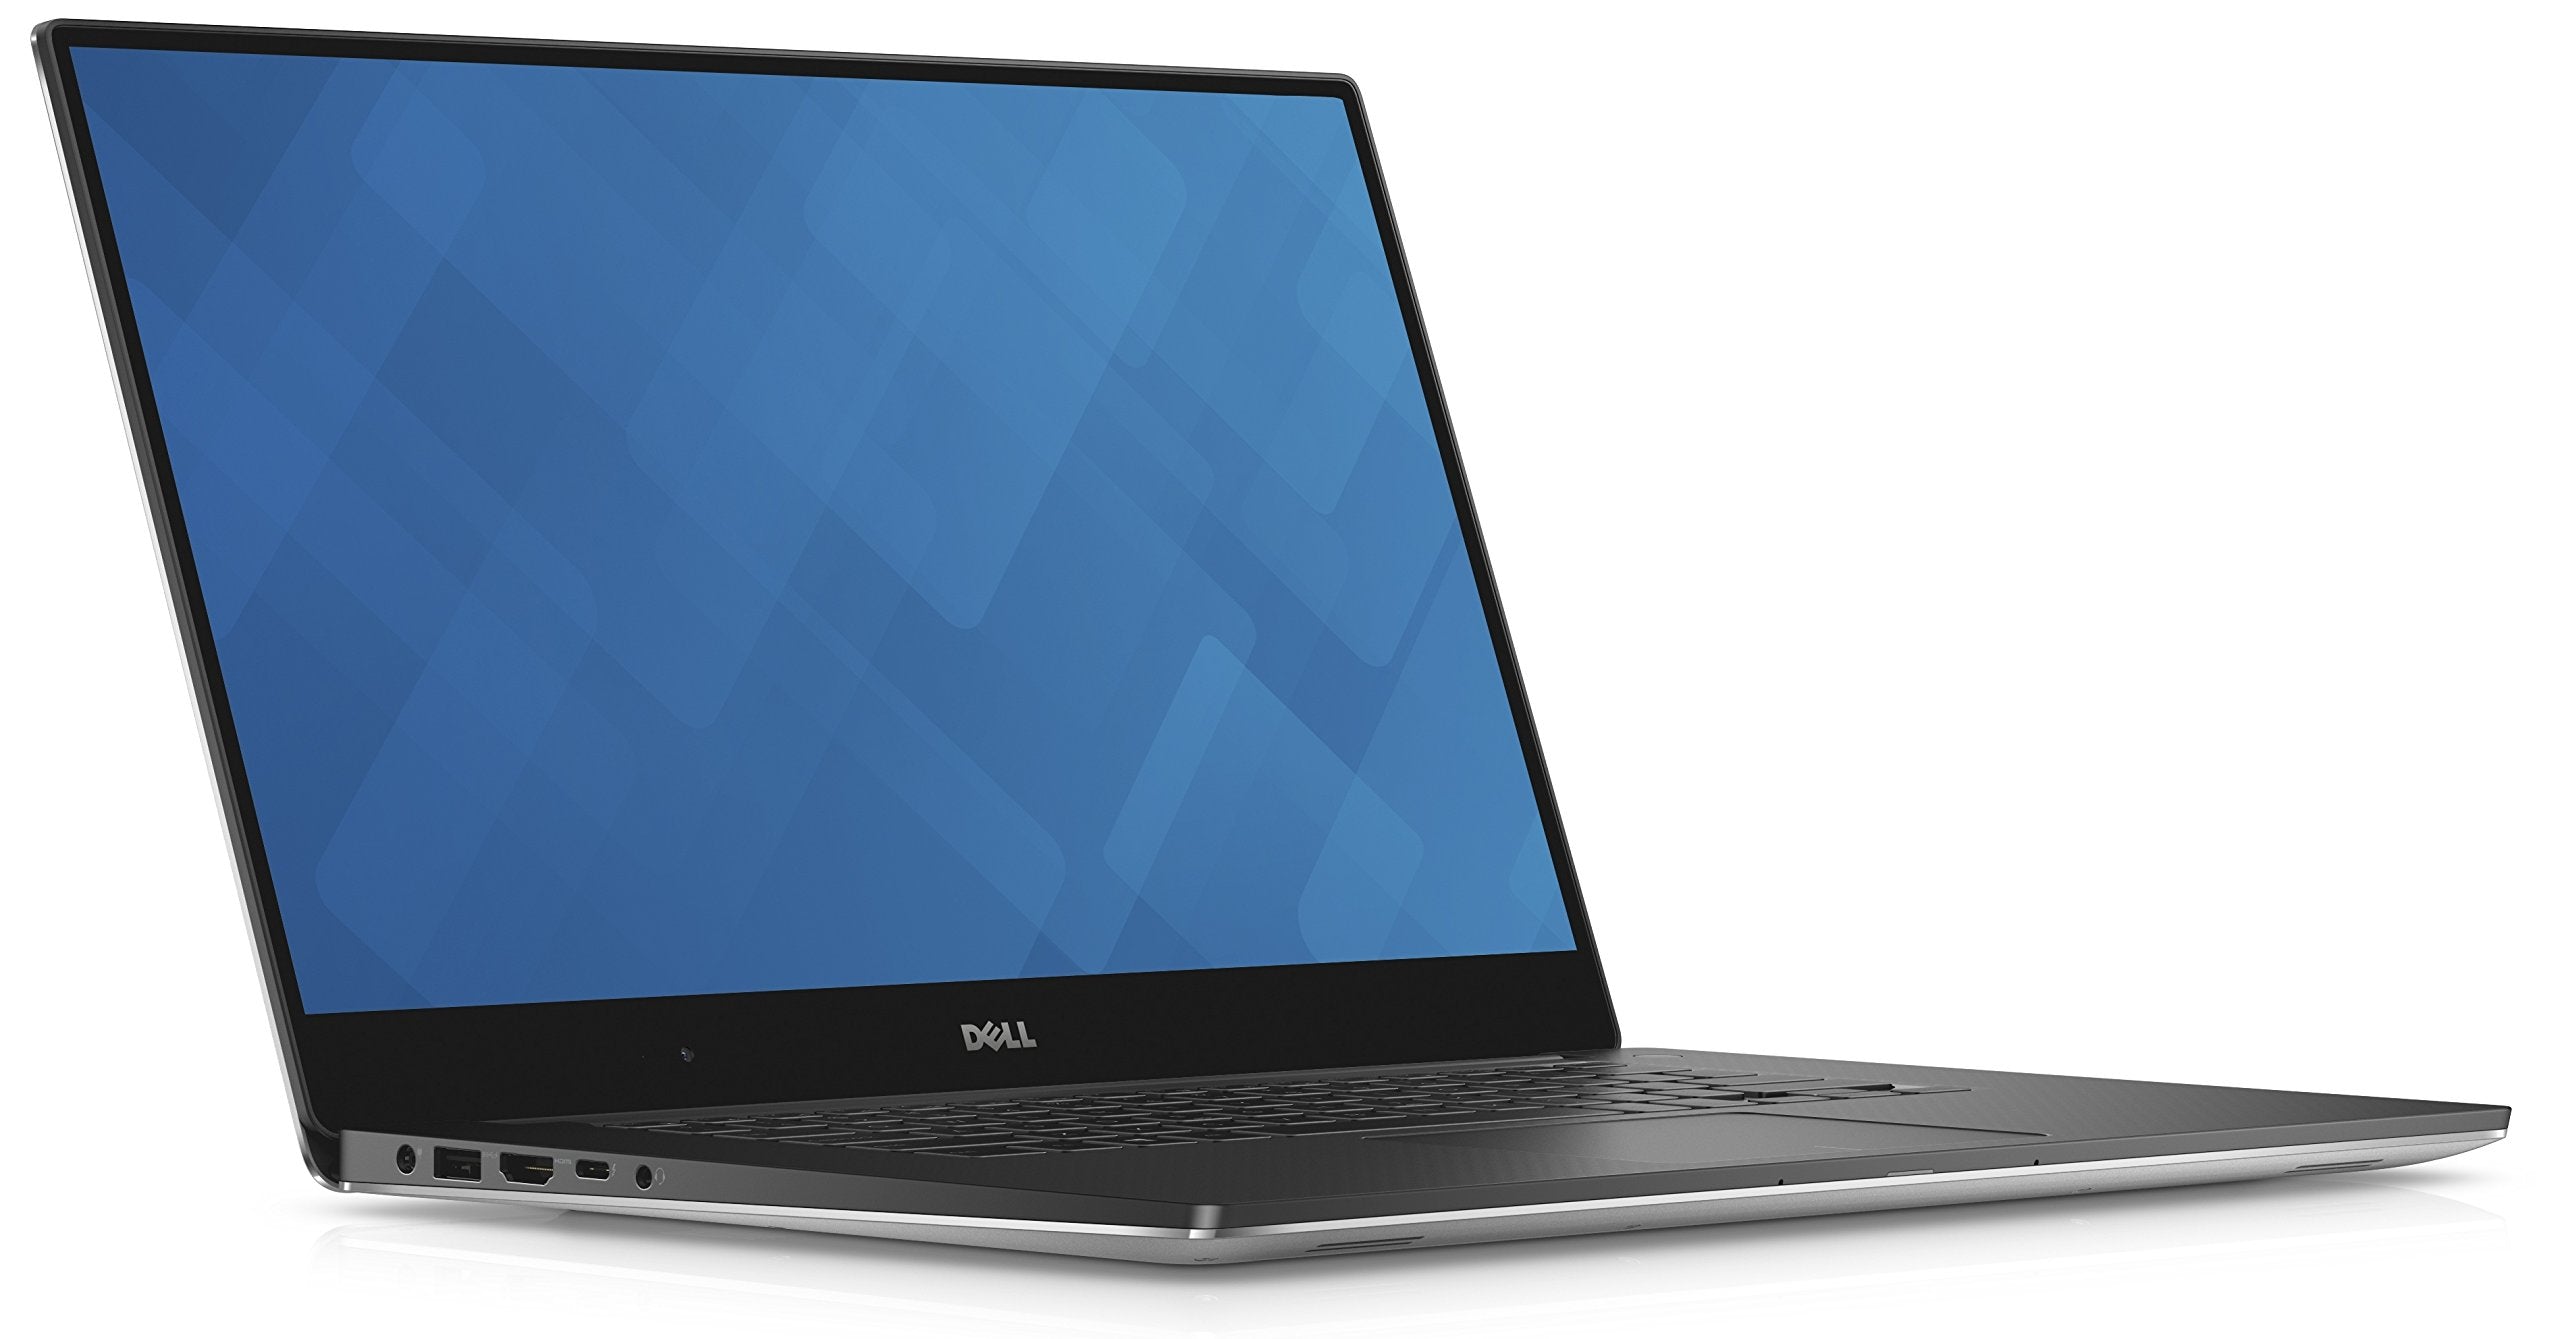 Dell XPS 15 9560 15.6” 4K UHD Touch Laptop – i7-7700HQ (3.8GHz), 16GB DDR4  RAM, 1TB NVMe SSD, NVIDIA GeForce GTX 1050, SD Card Reader, WIFI 5 & BT 5,  